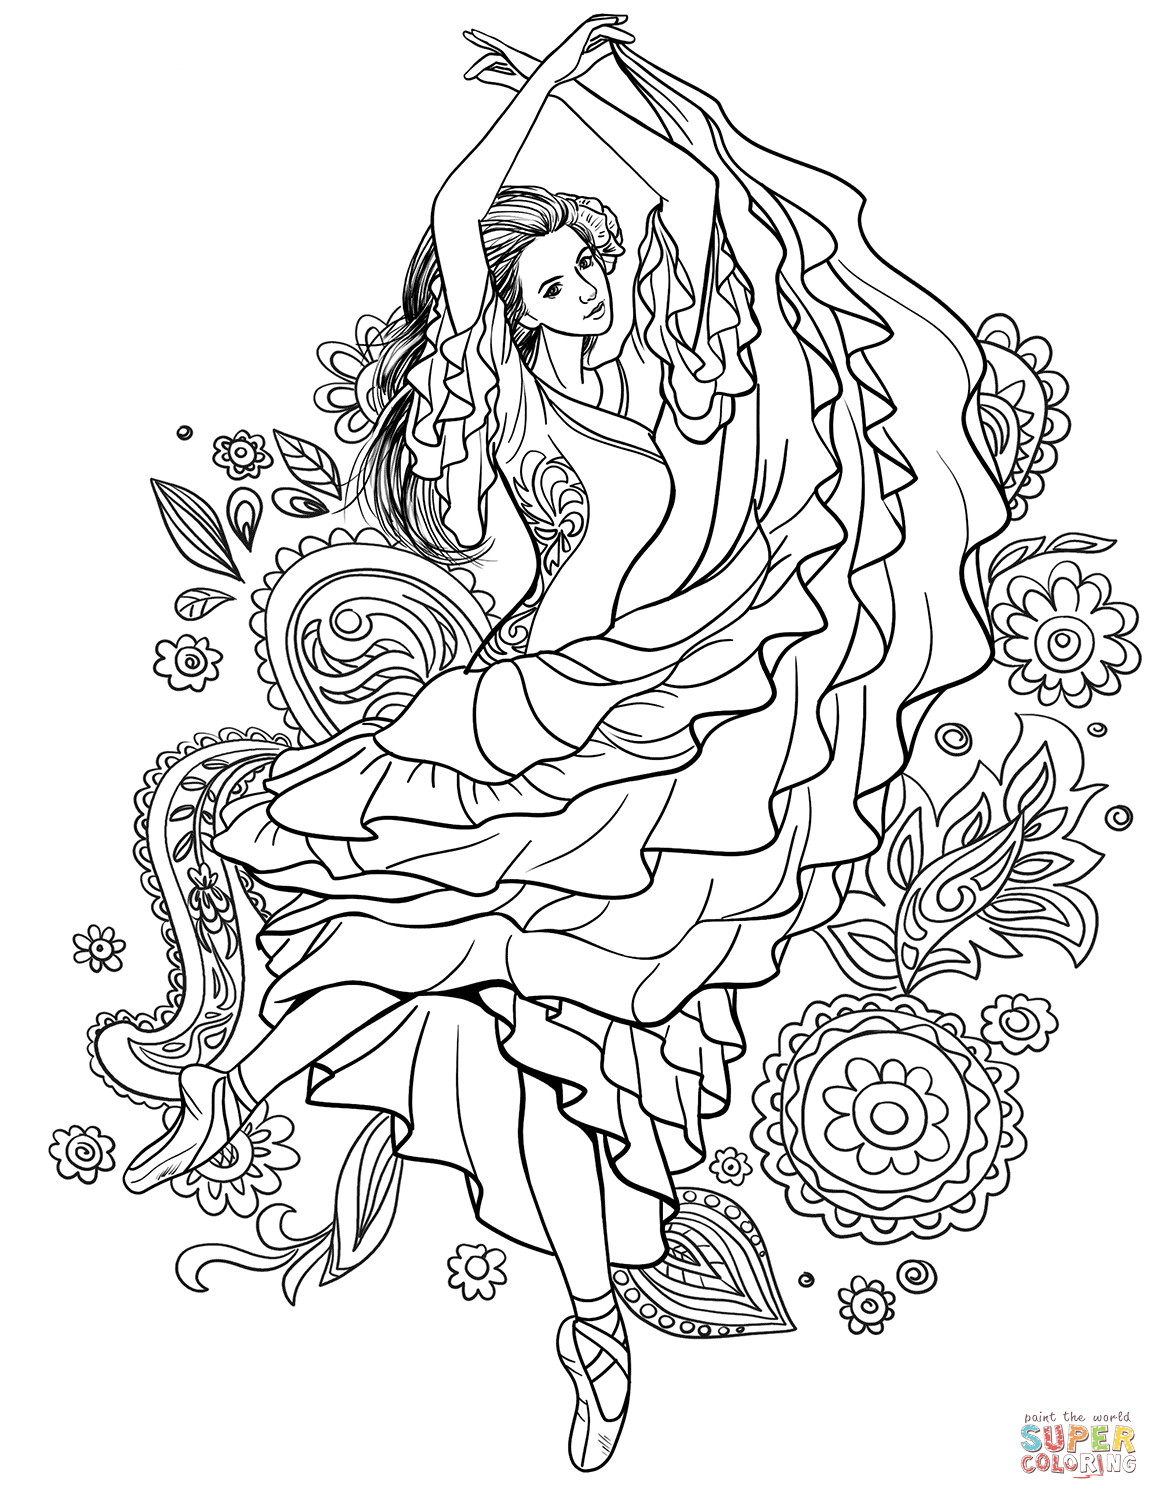 Gypsy Woman Dancing Carmen coloring page | Free Printable Coloring Pages